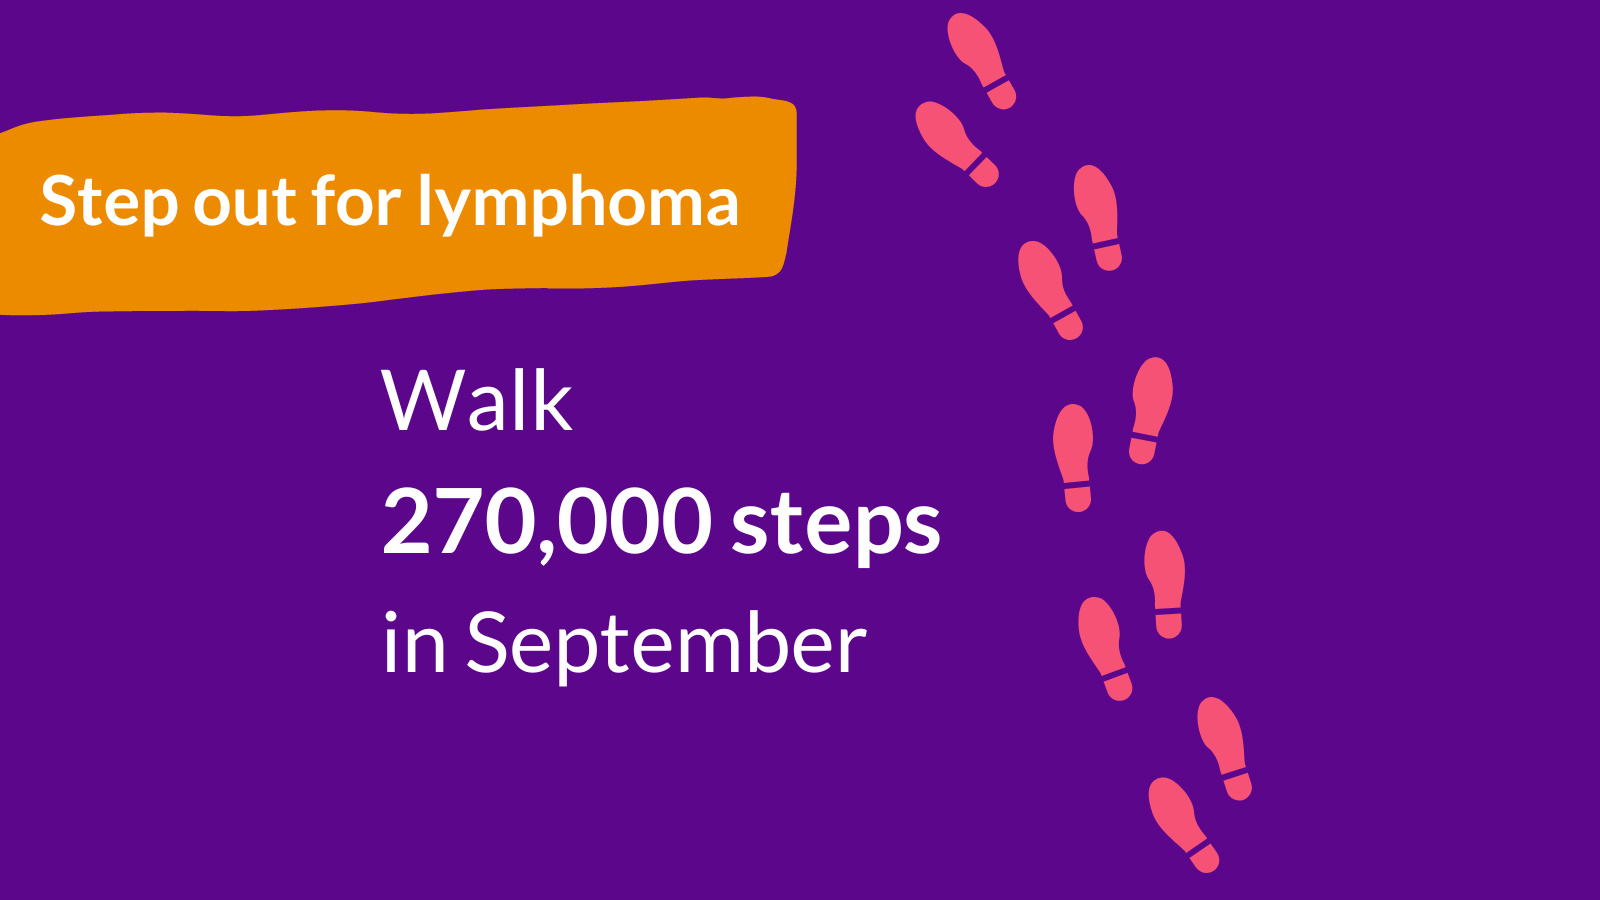 Step out for lymphoma